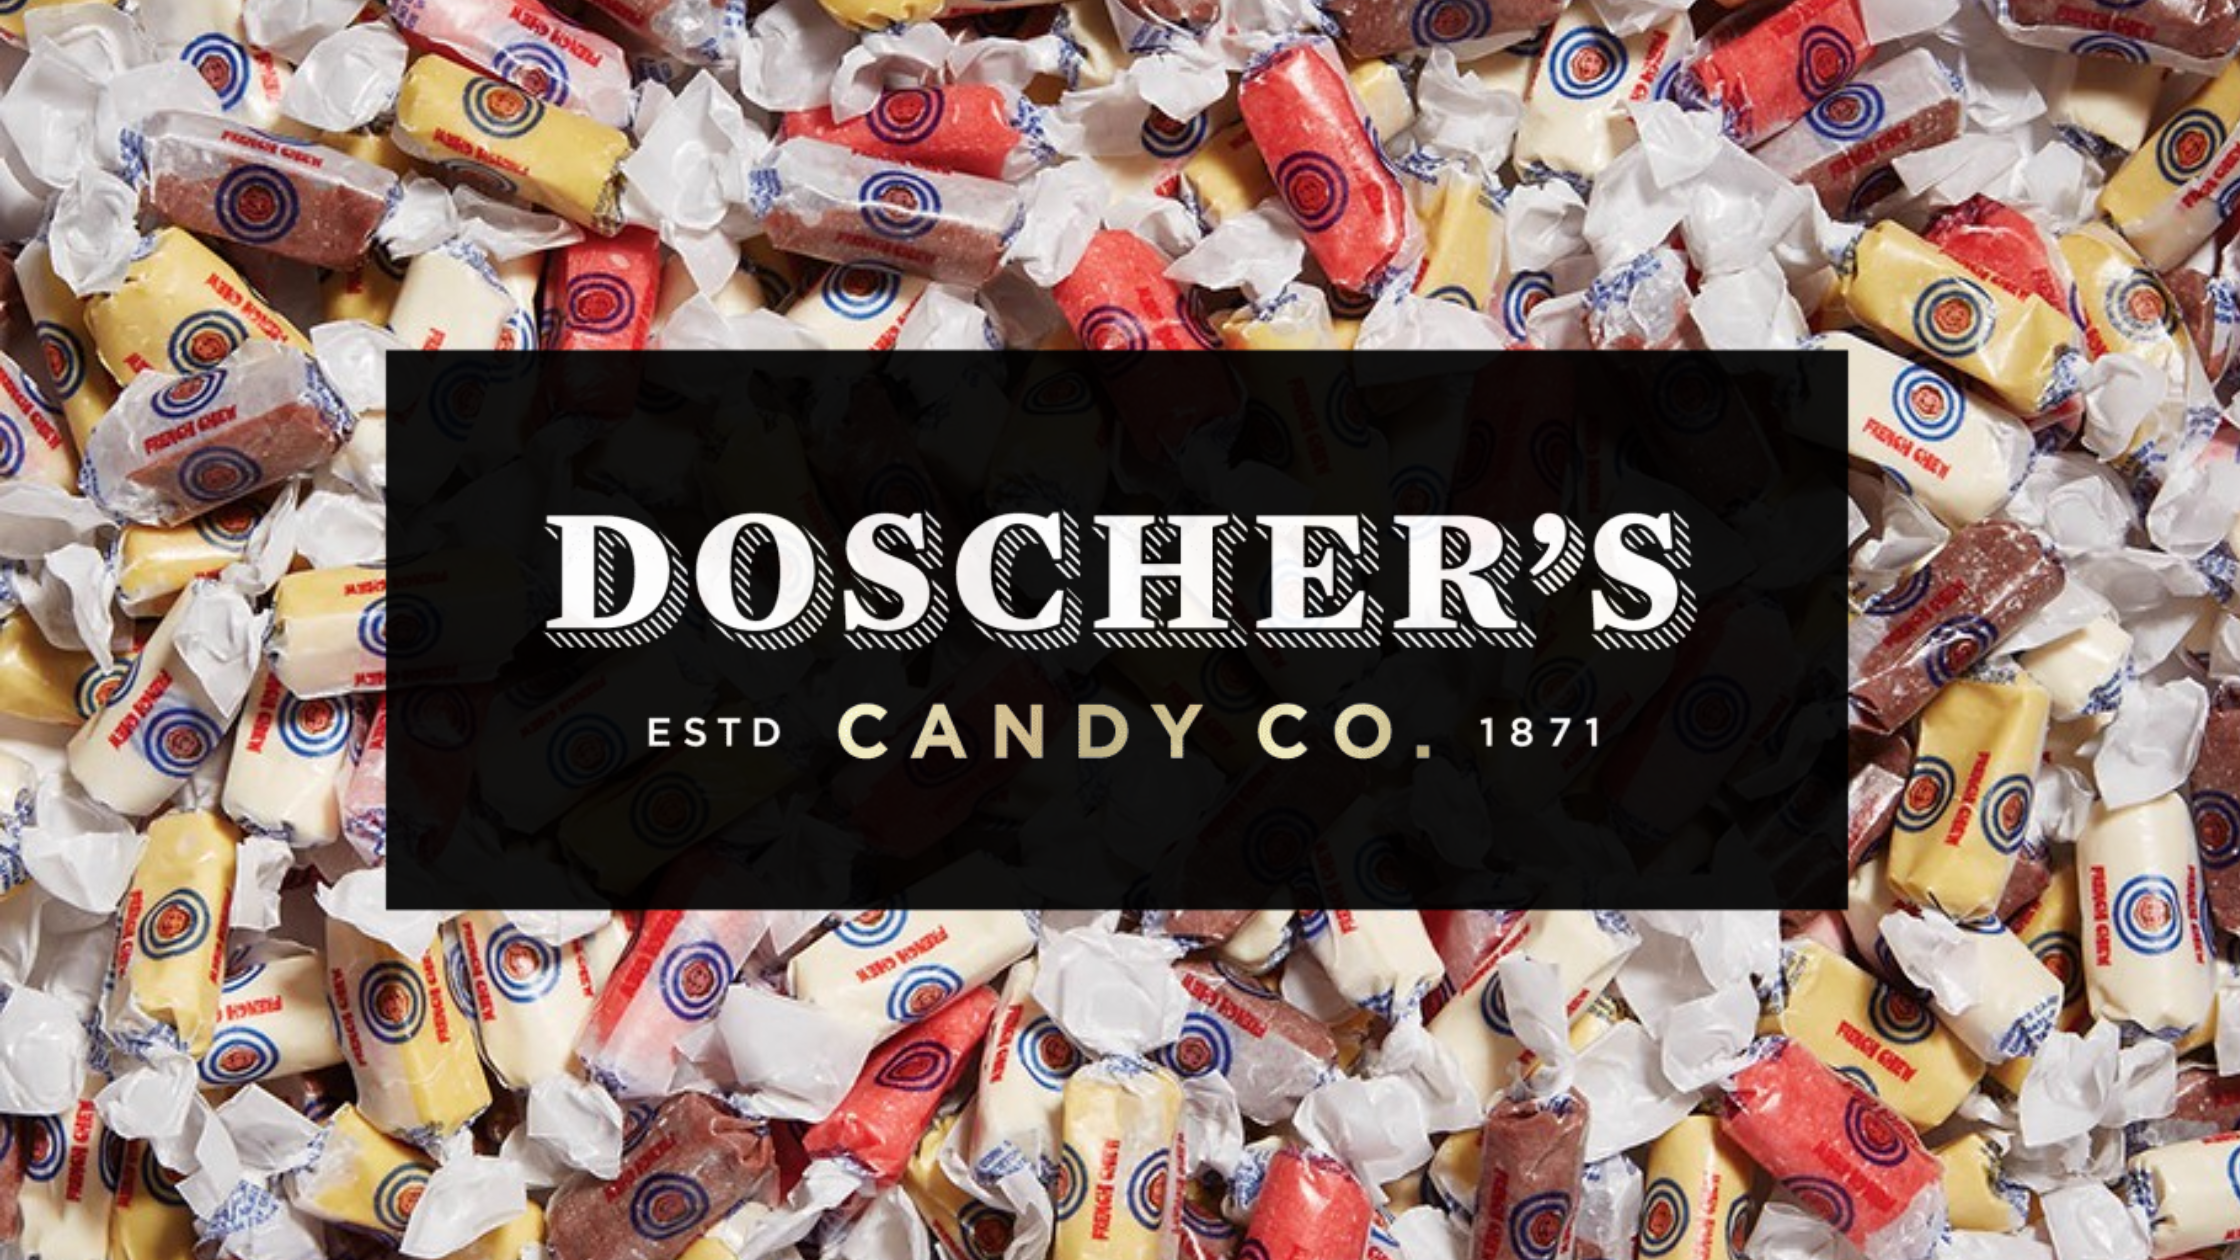 The Delicious History of the Doscher’s Candy Company